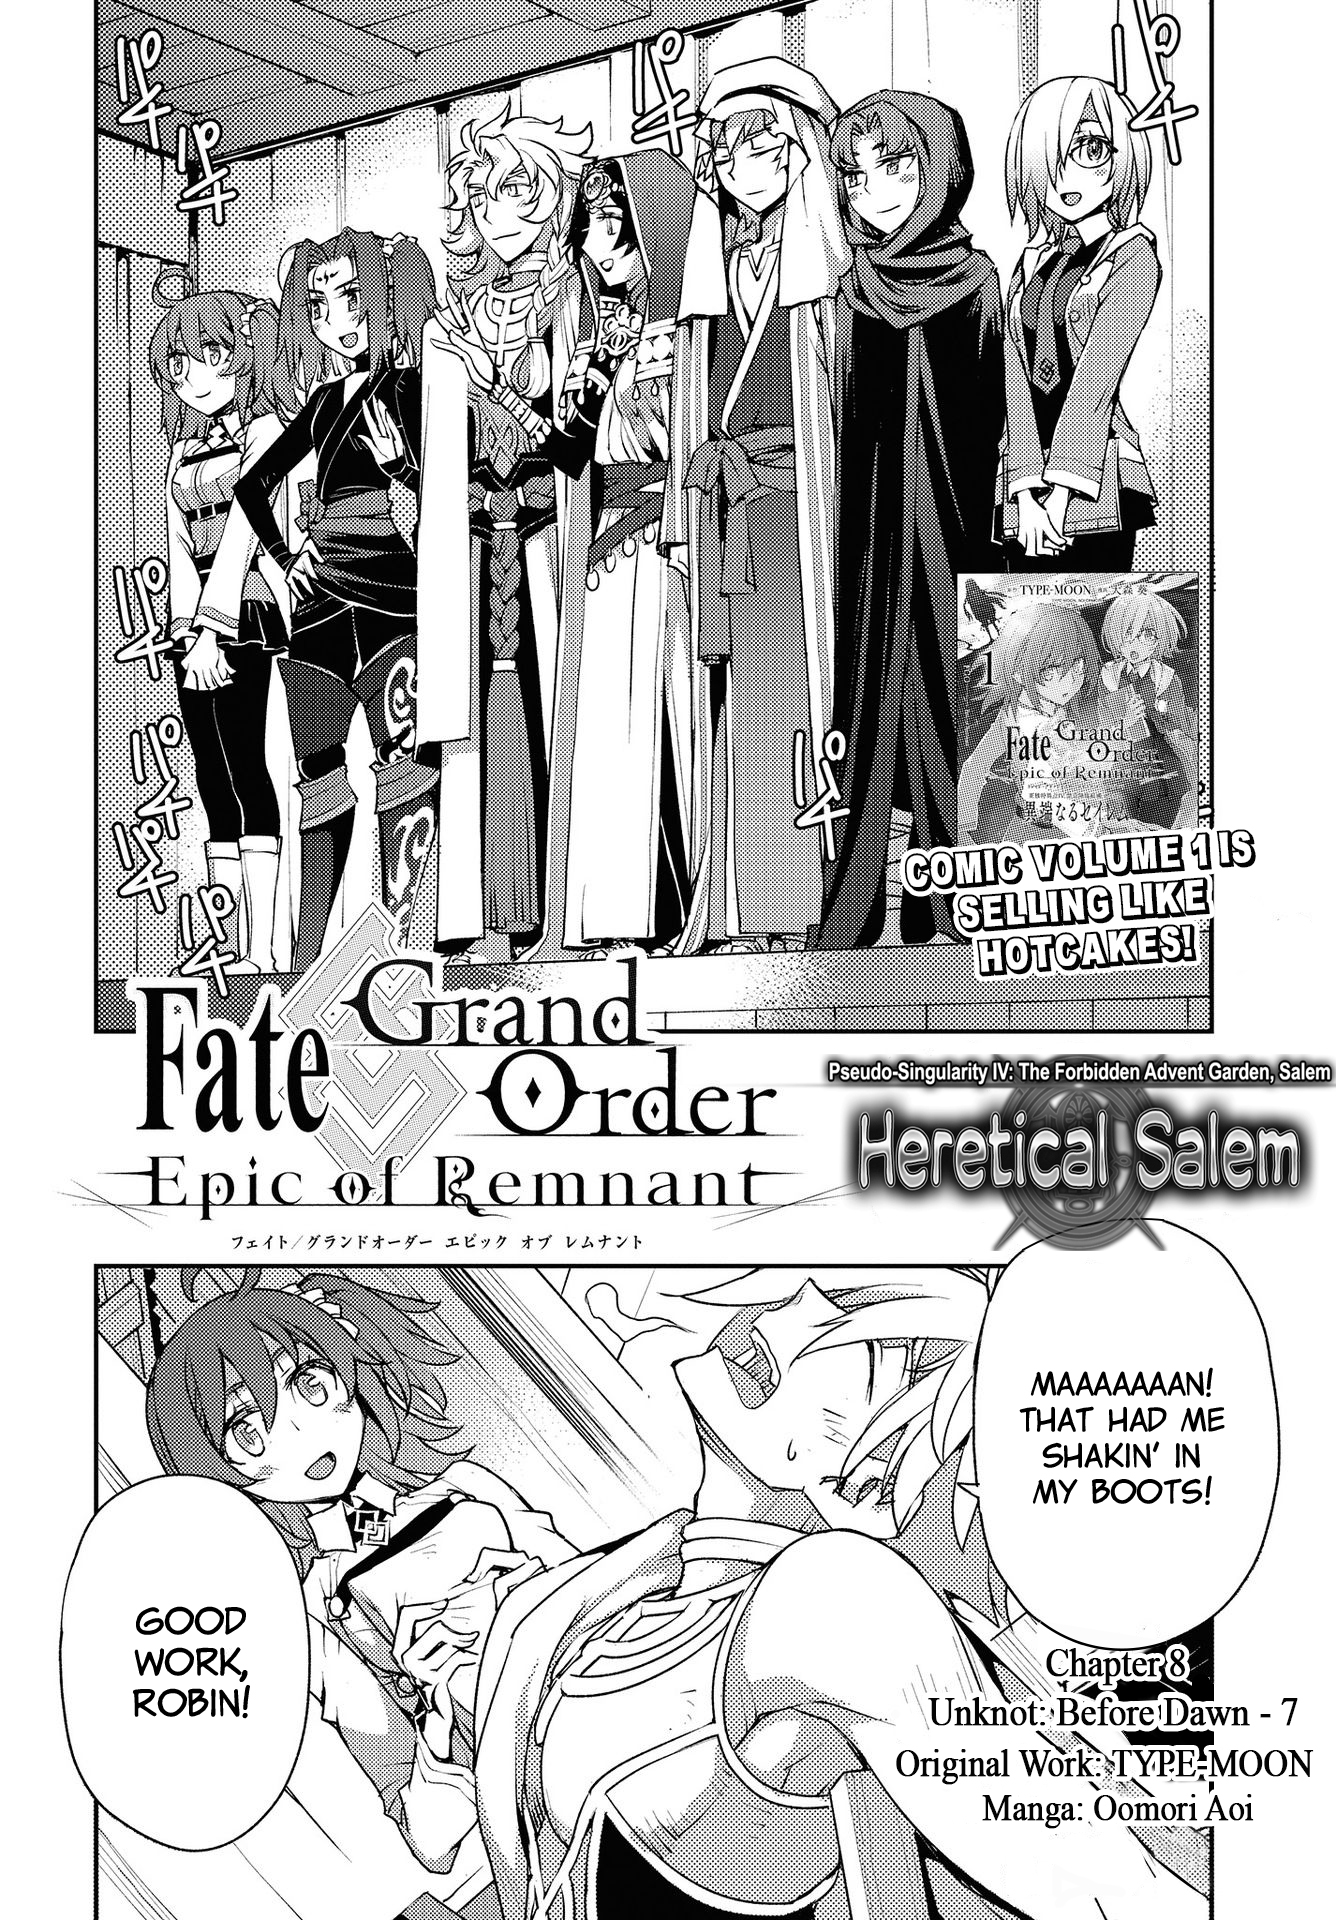 Fate/grand Order: Epic Of Remnant: Pseudo-Singularity Iv: The Forbidden Advent Garden, Salem - Heretical Salem Chapter 8: Unknot: Before Dawn 7 - Picture 2